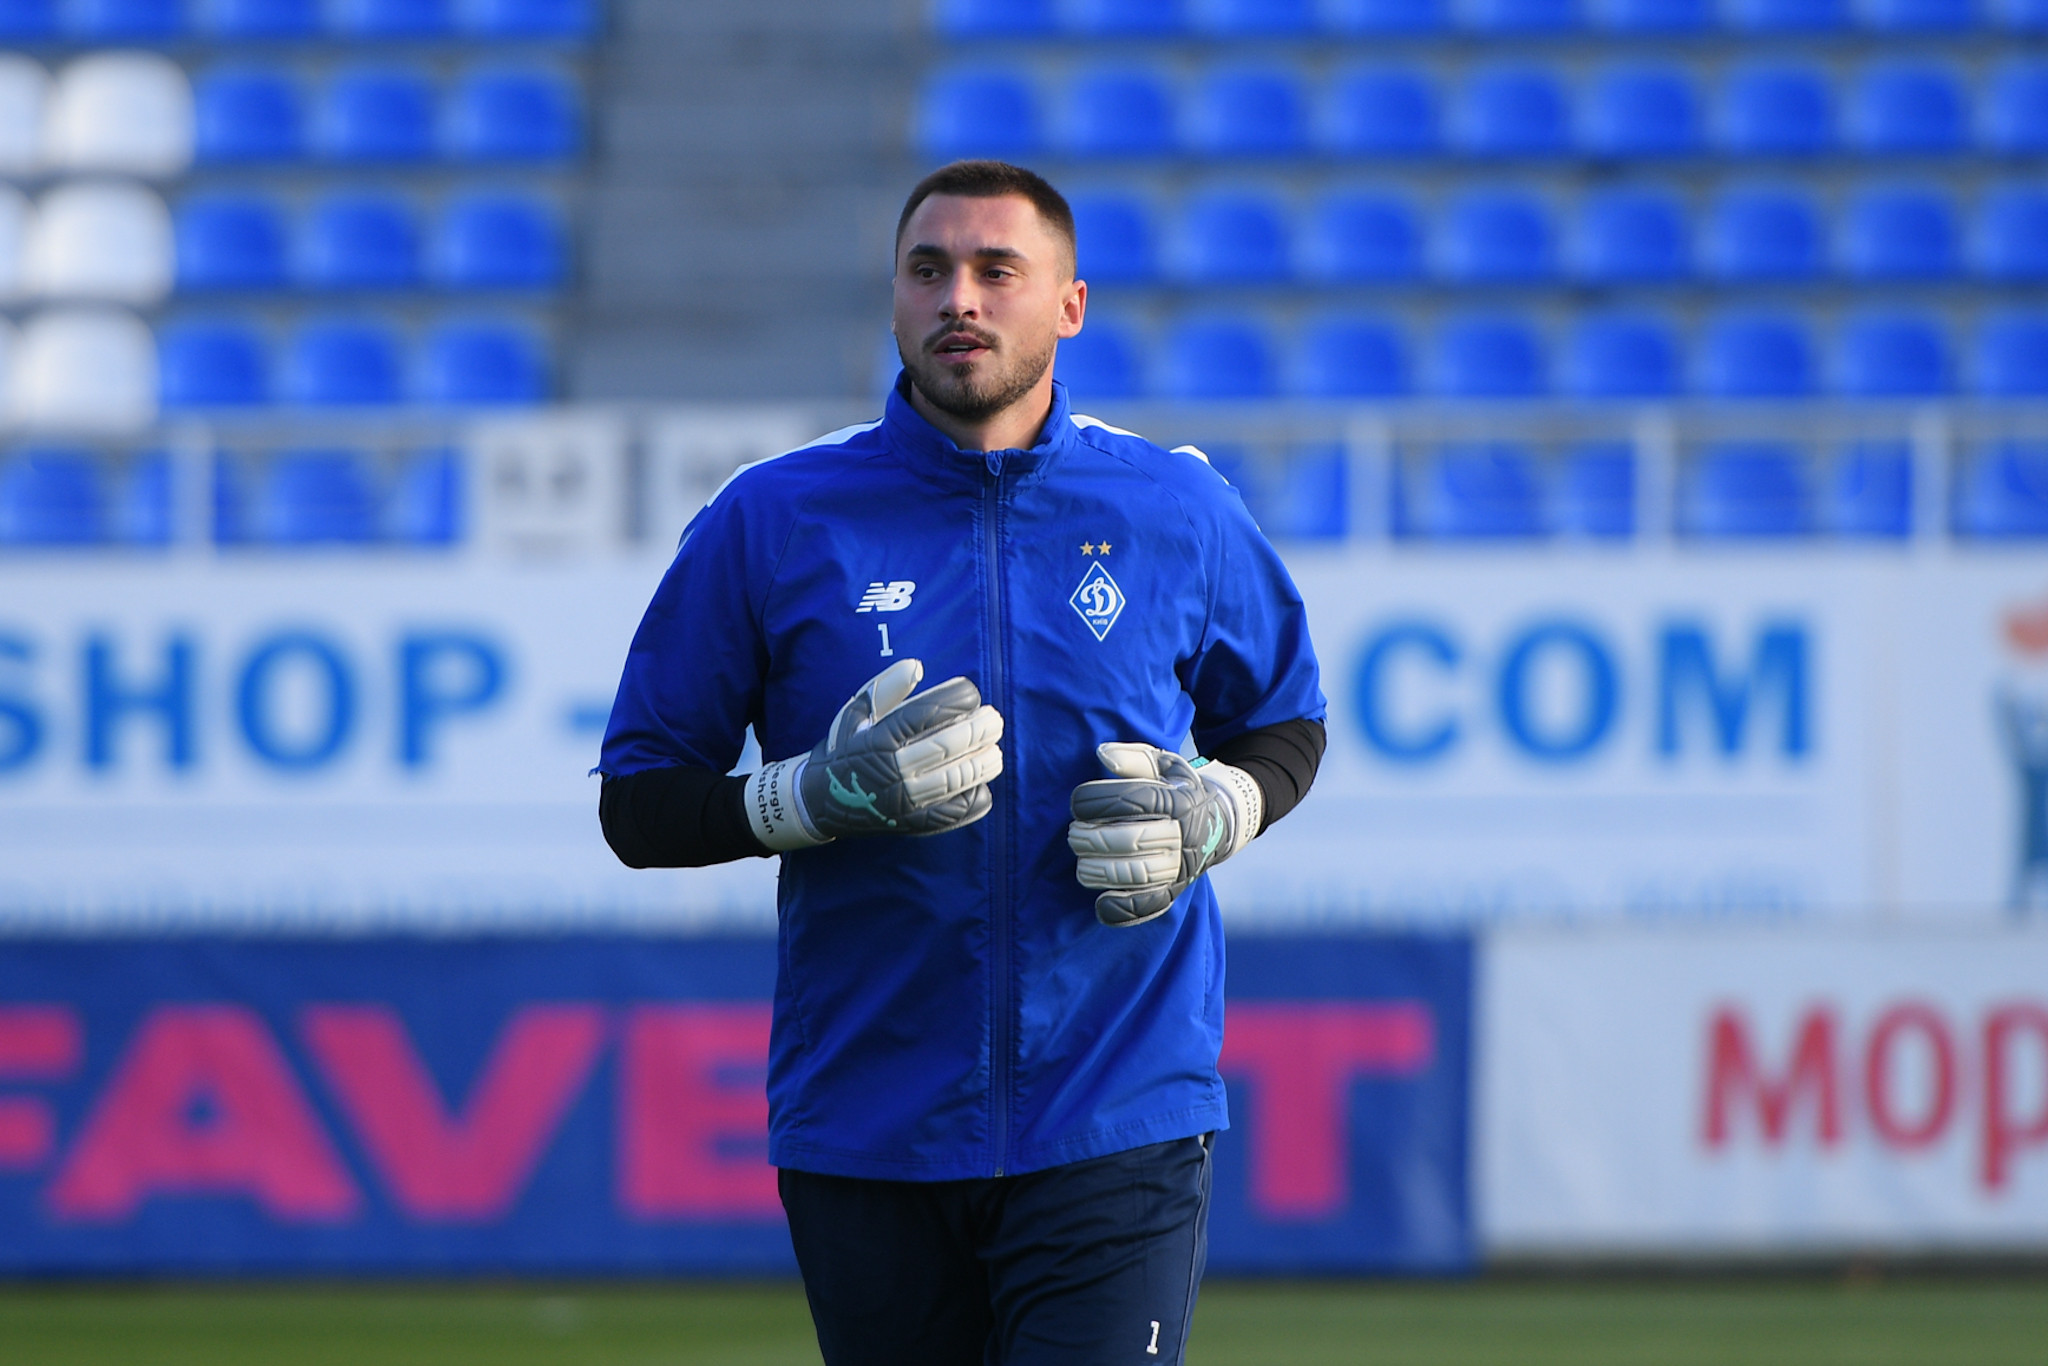 Heorhiy Bushchan among top 3 Dynamo keepers in terms of clean sheets